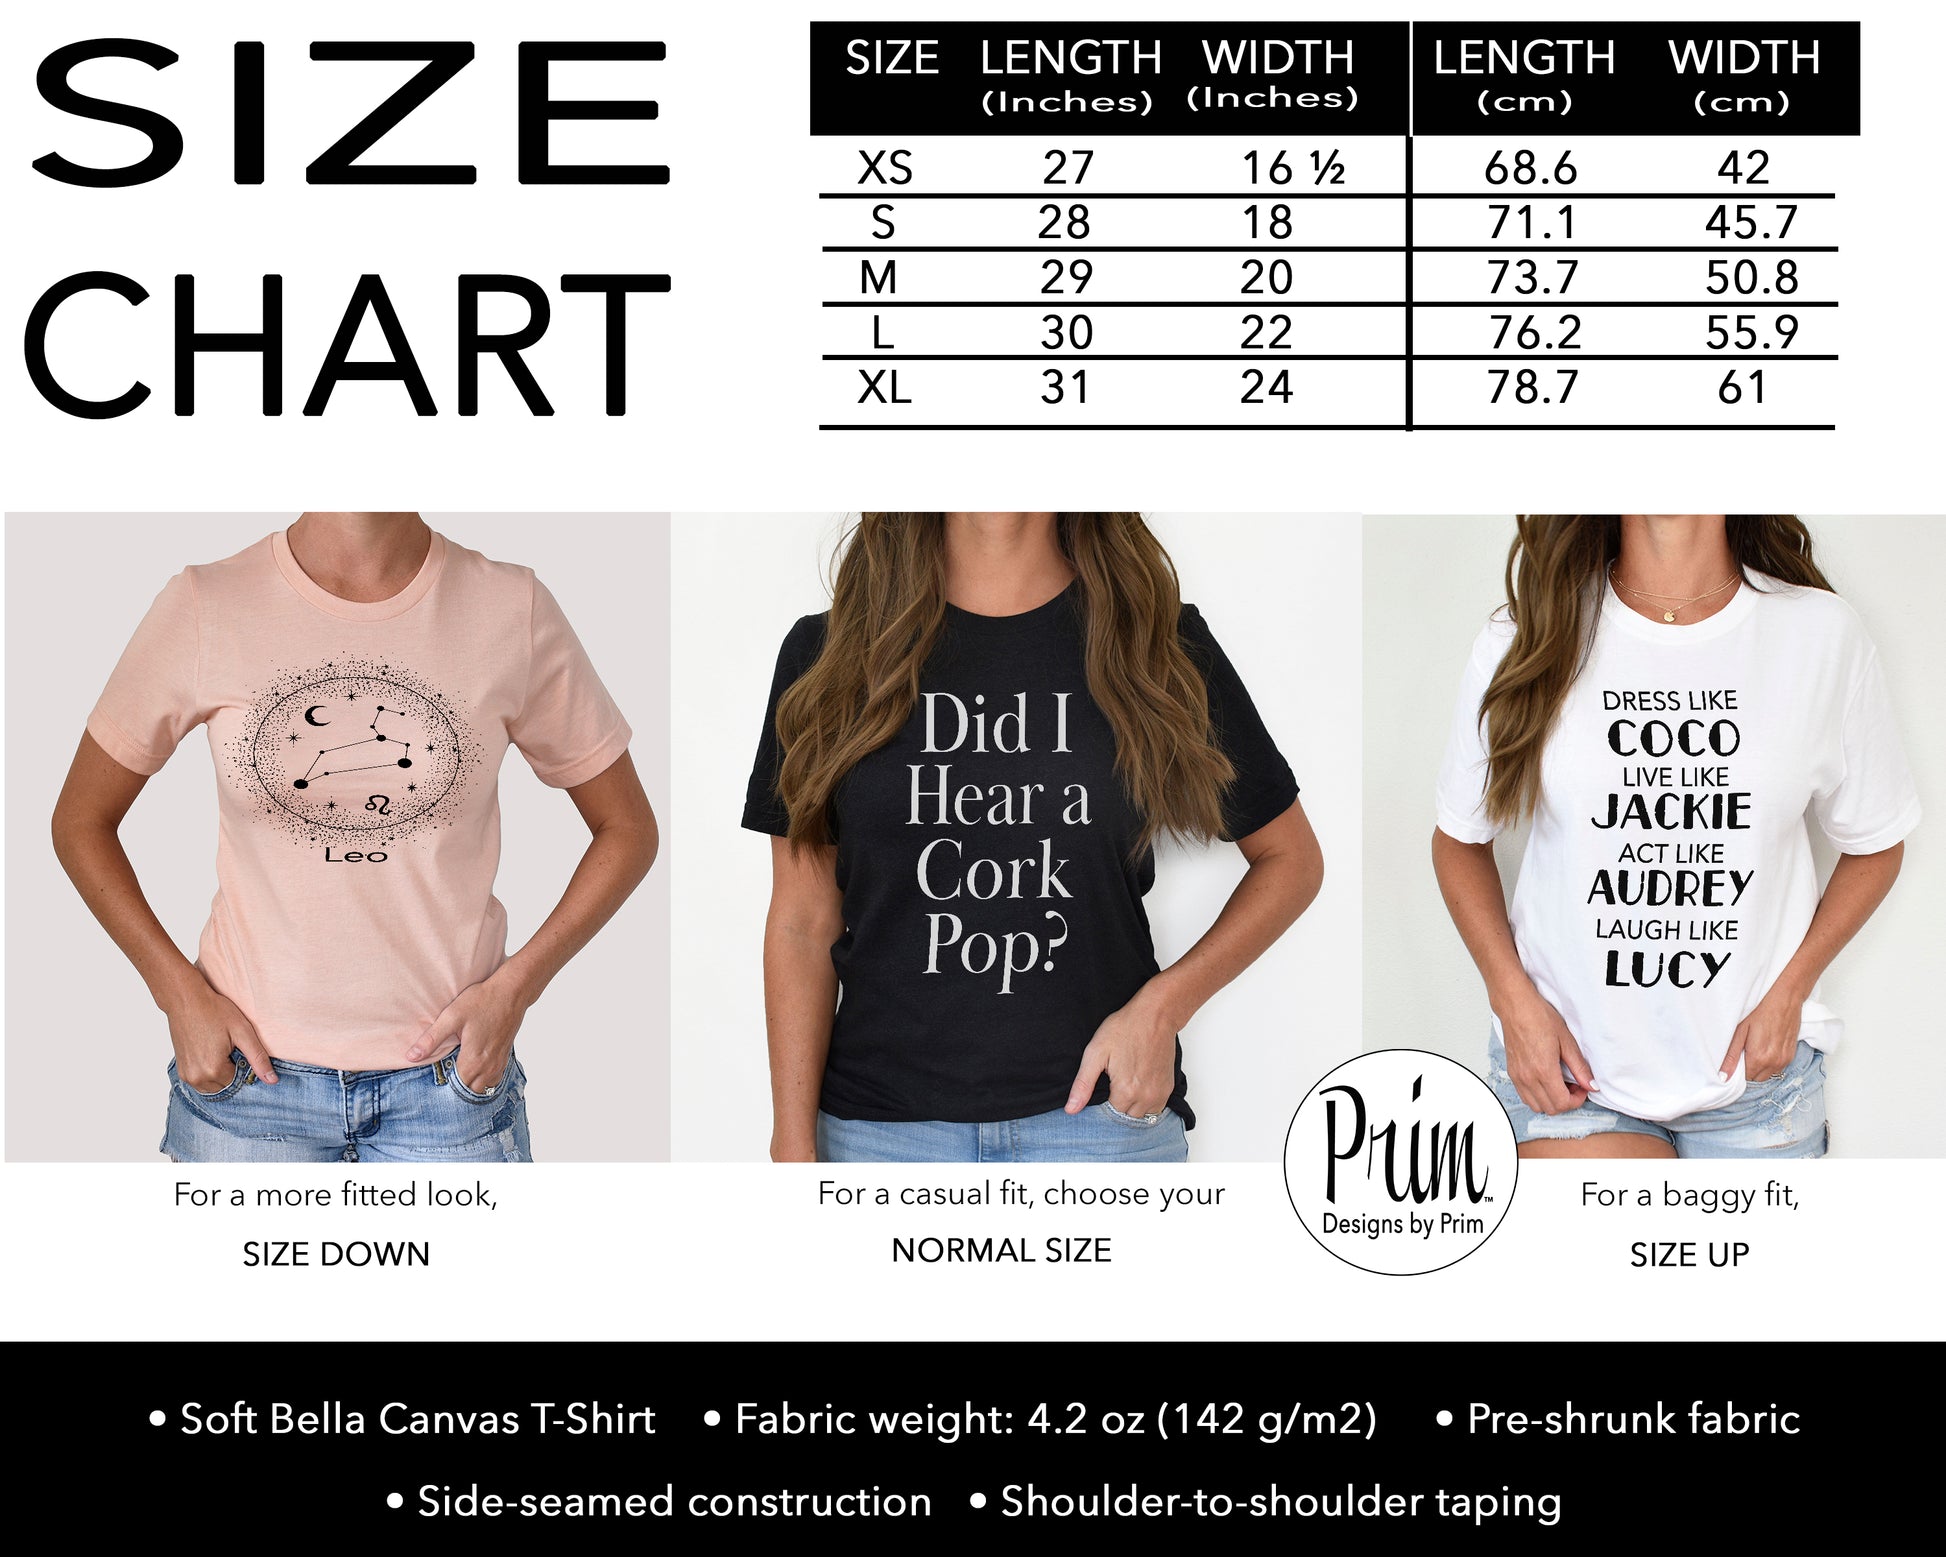 Designs by Prim Graphic T-Shirt Size Chart